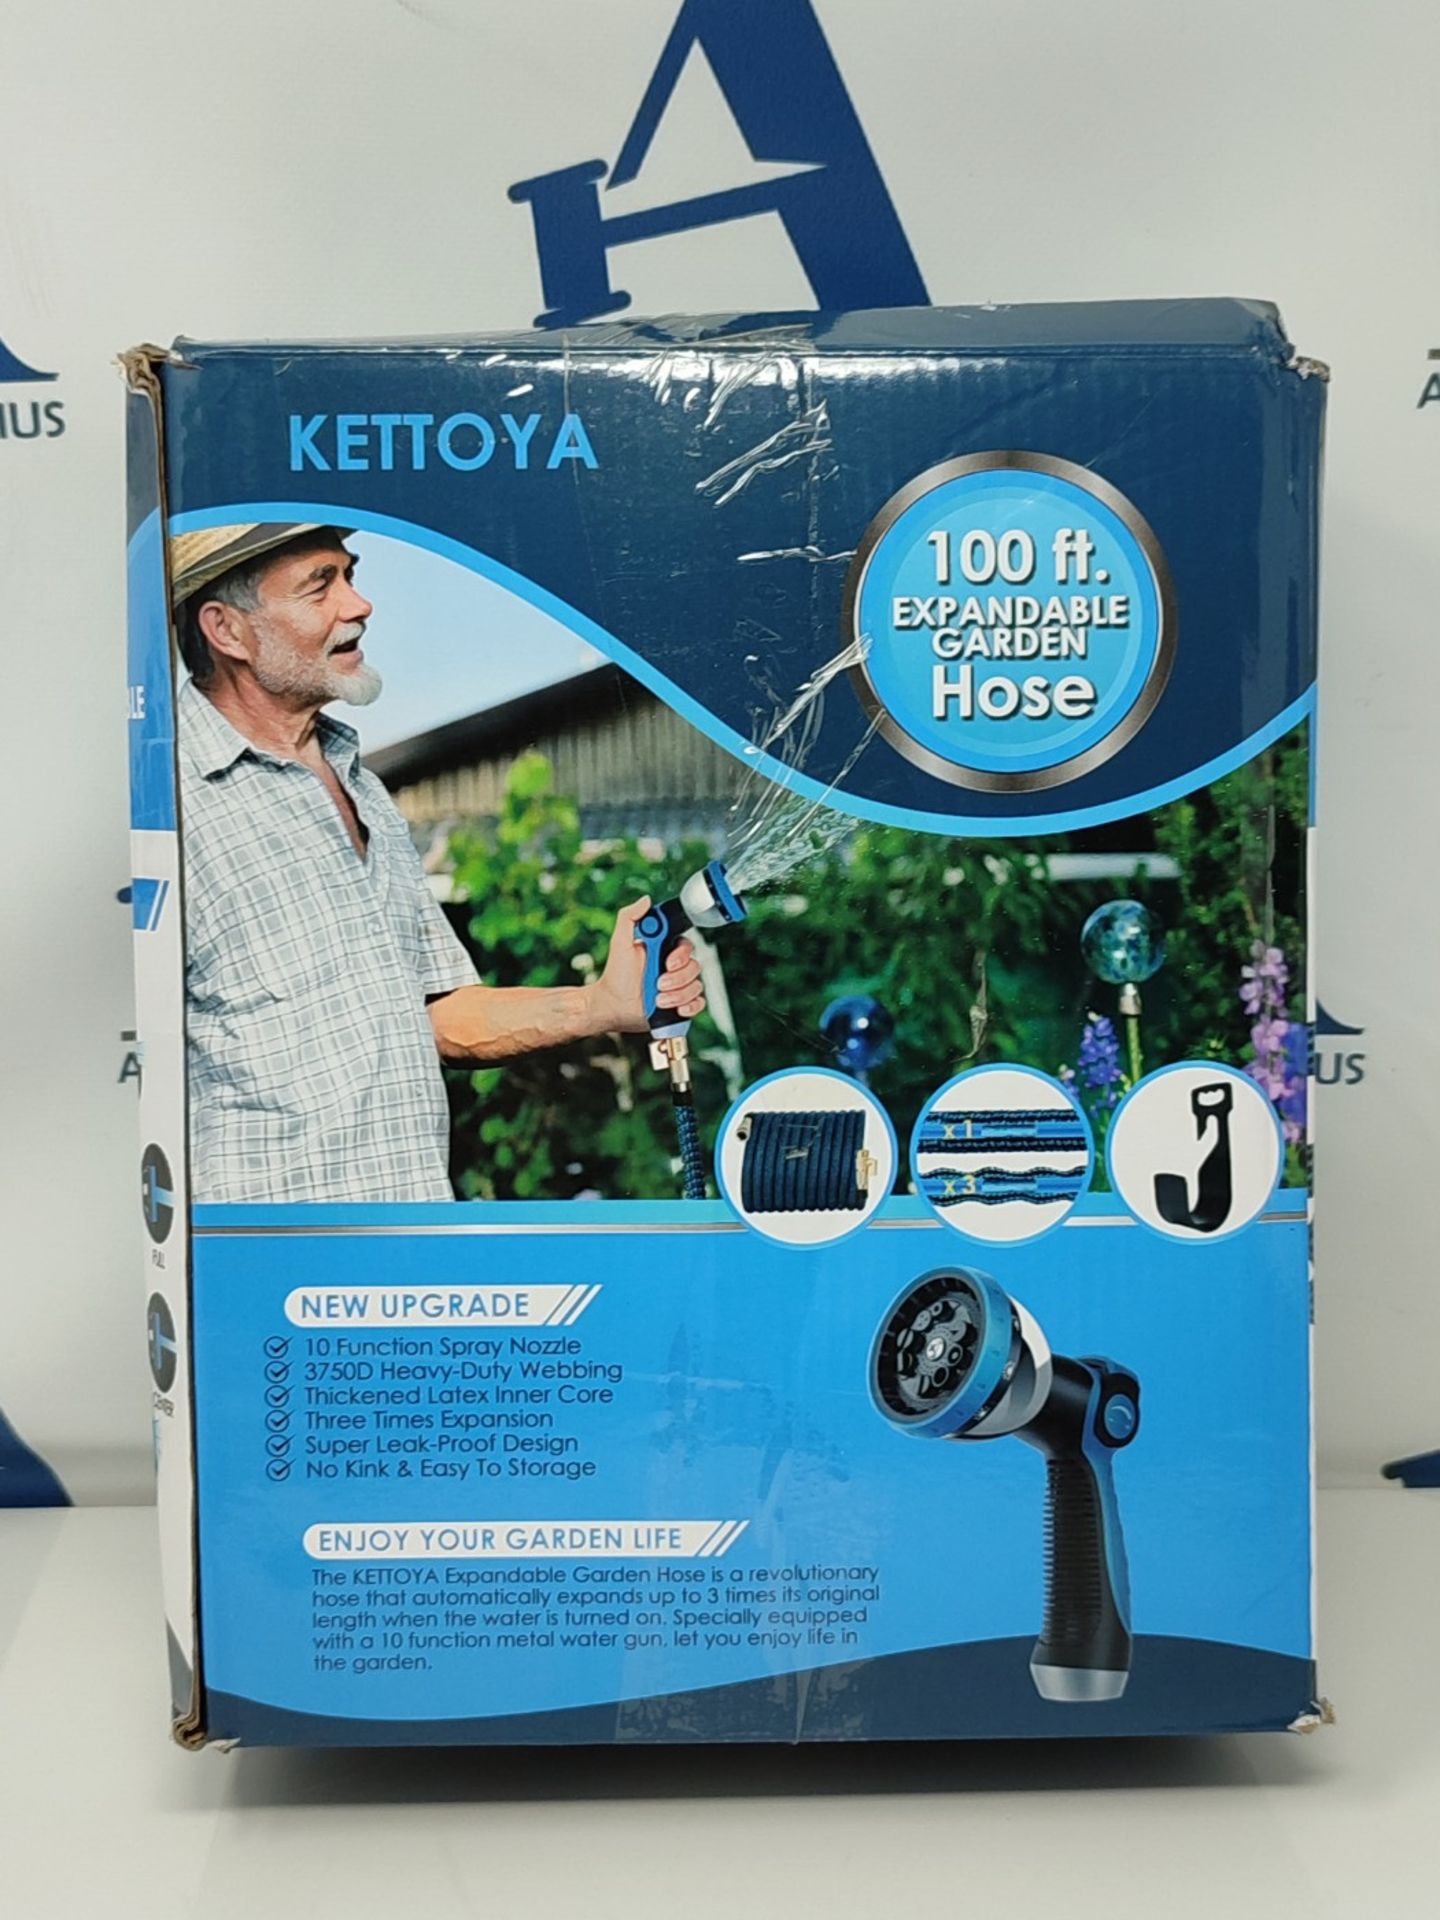 KETTOYA 100FT Expandable Garden Hose, Flexible Water Hose with 10-Pattern Spray Nozzle - Image 9 of 10